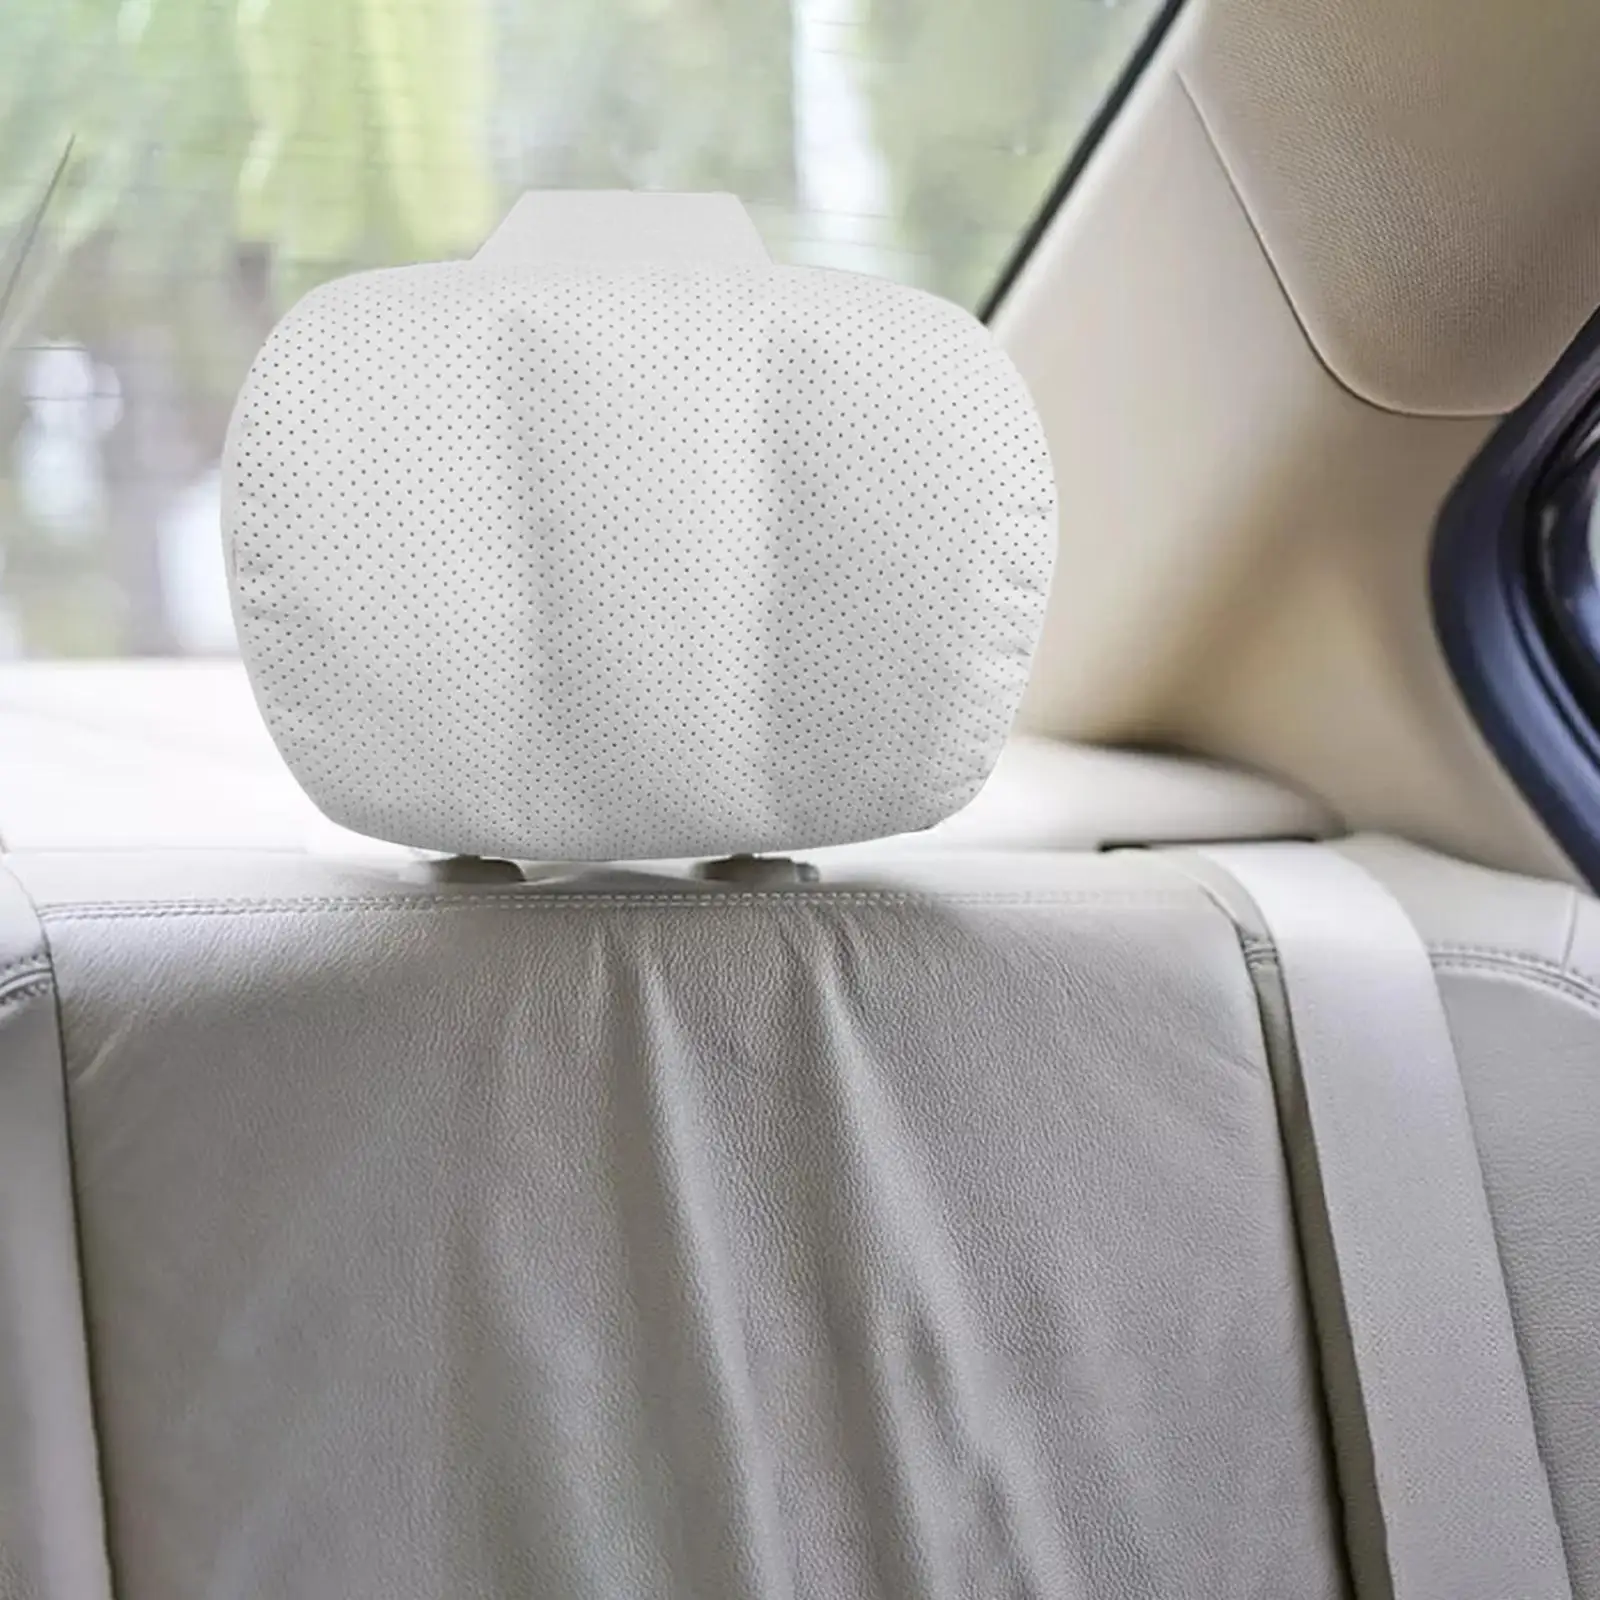 Head Rest Pillows Universal Comfortable Soft Breathable Premium Automotive Neck Support for Driving Seat Travel Home Office